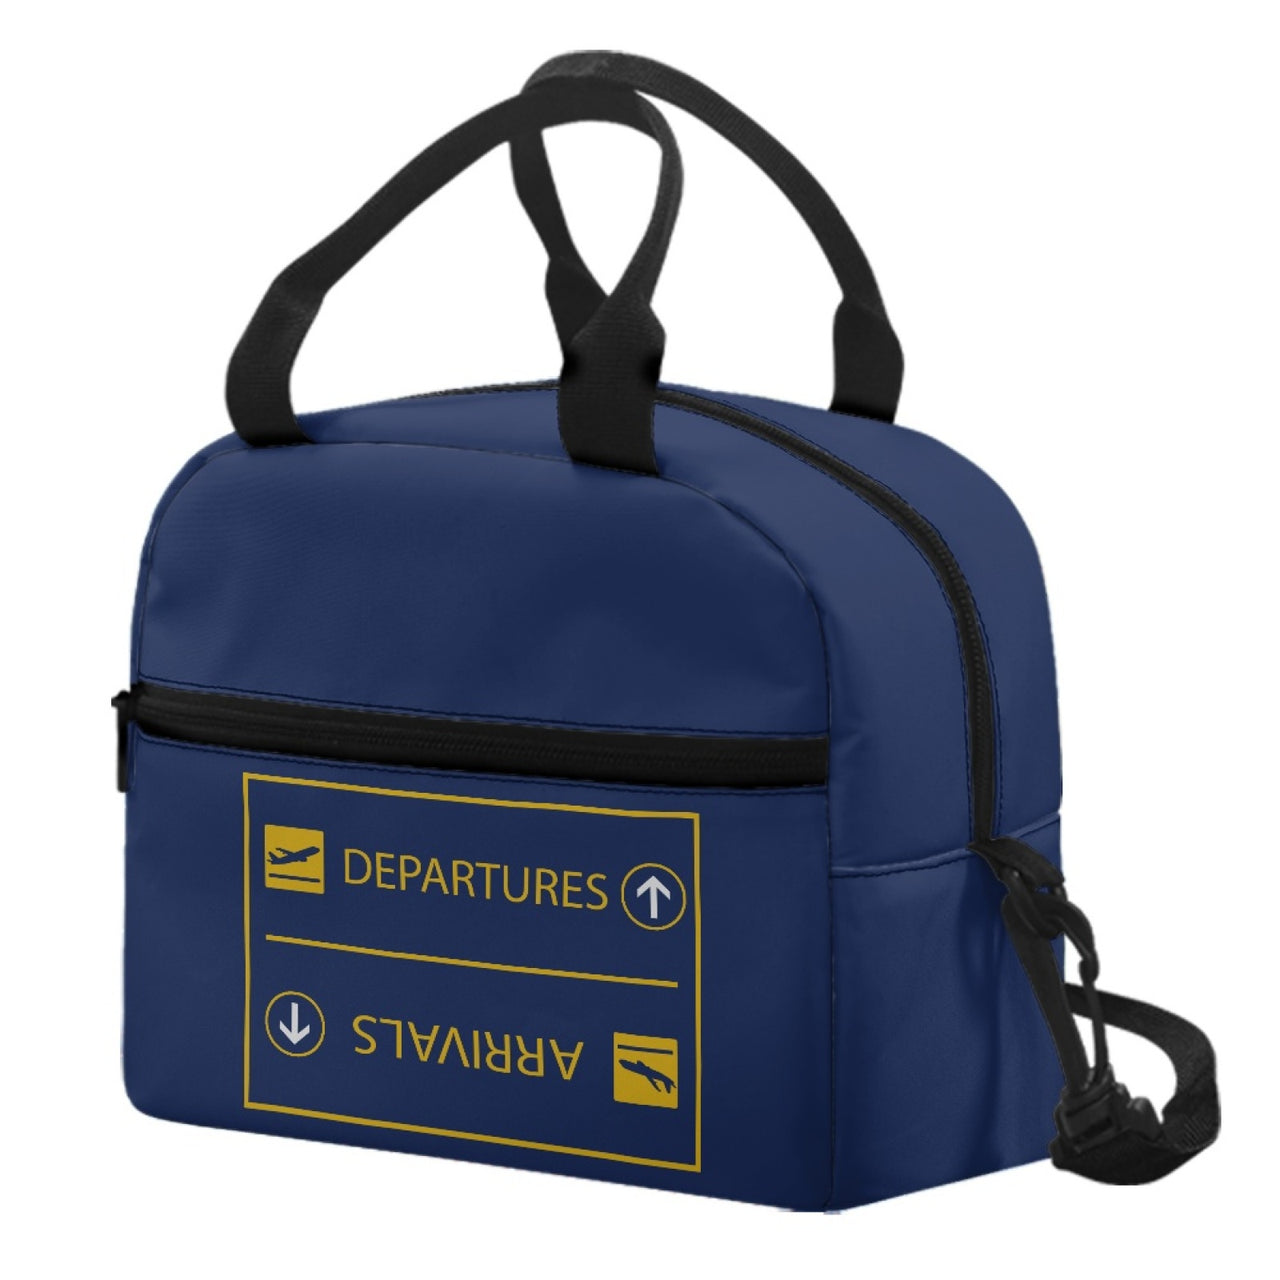 Arrival & Departures 7 Designed Lunch Bags